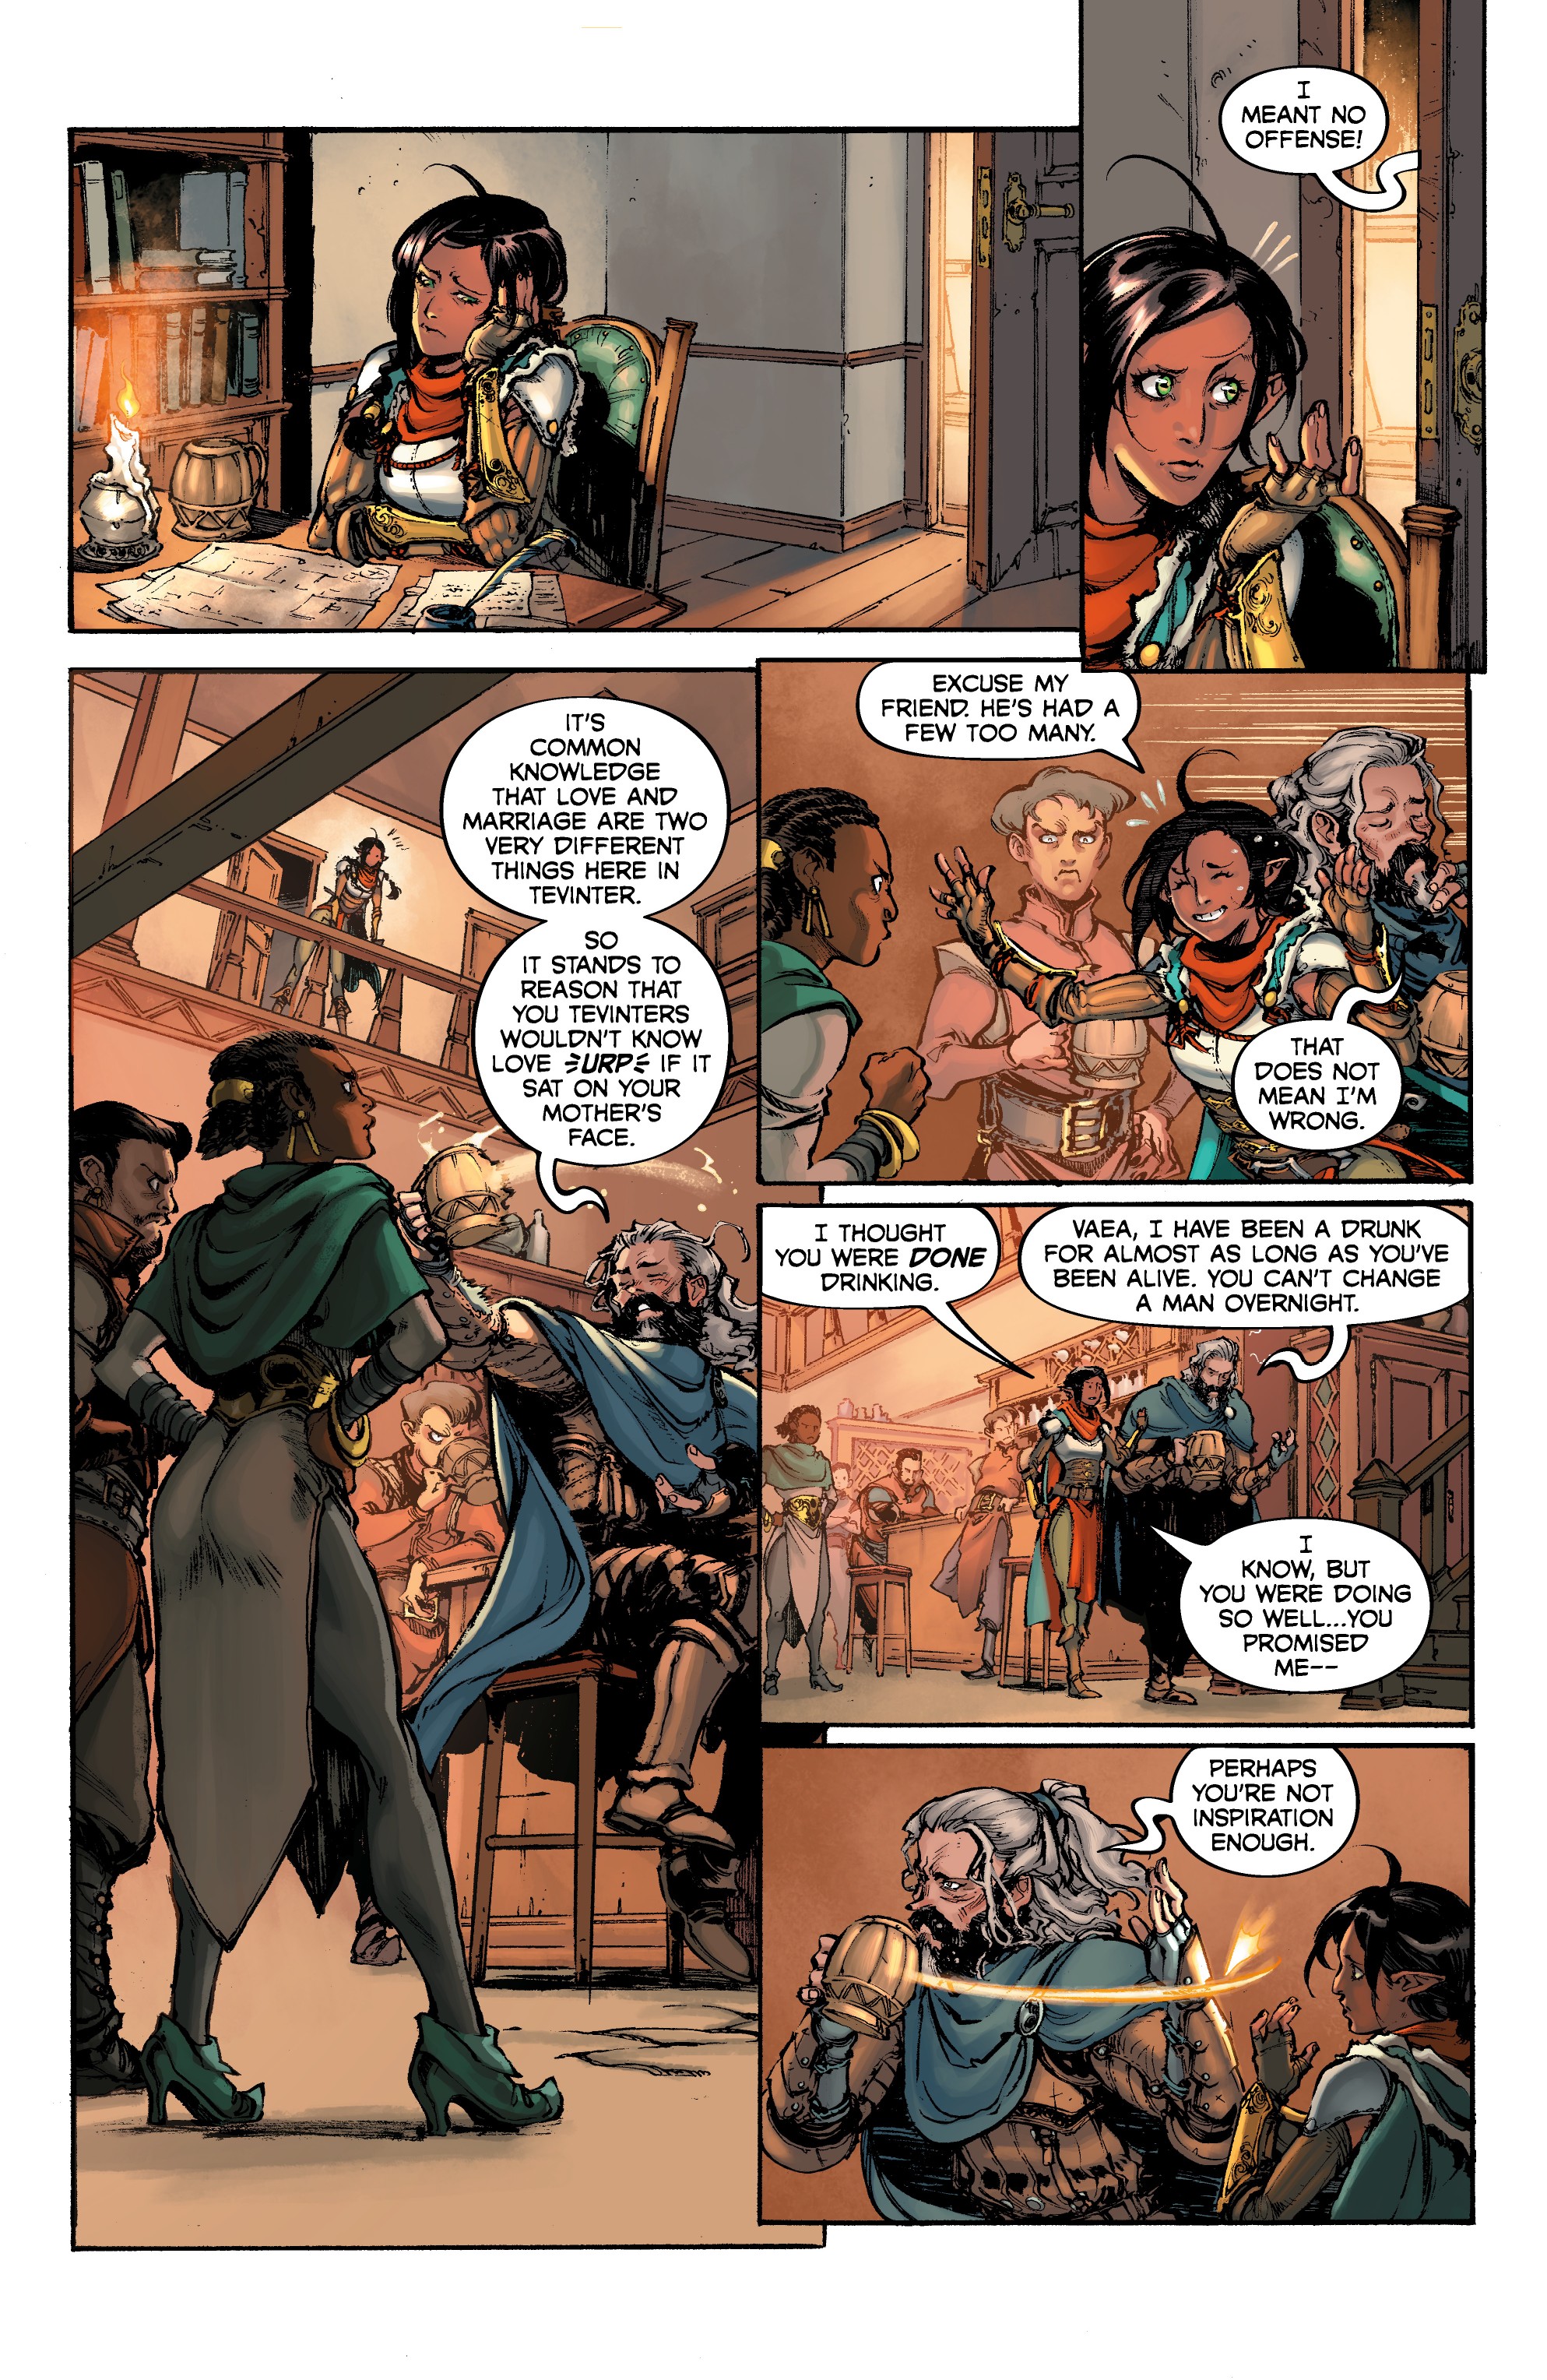 Dragon Age: Deception (2018-): Chapter 3 - Page 3